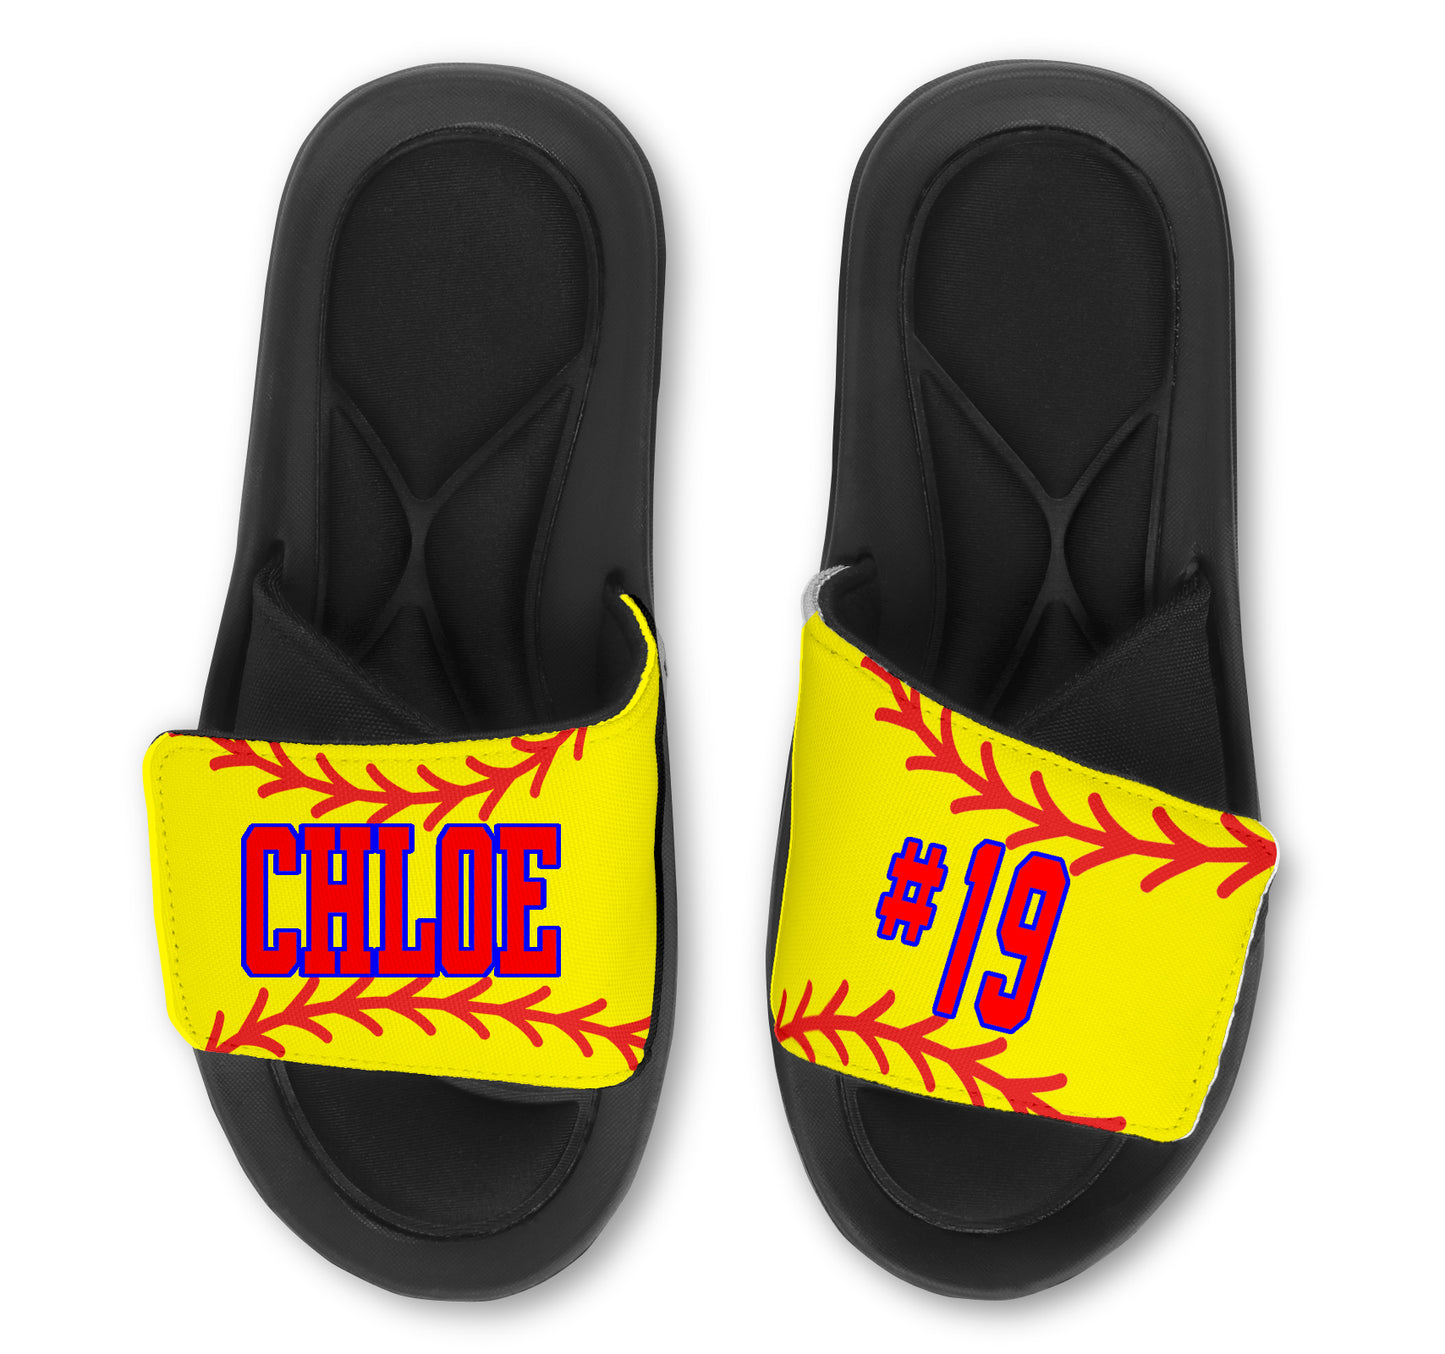 Softball Custom Slides / Sandals -Customize With Your Name Or Number!